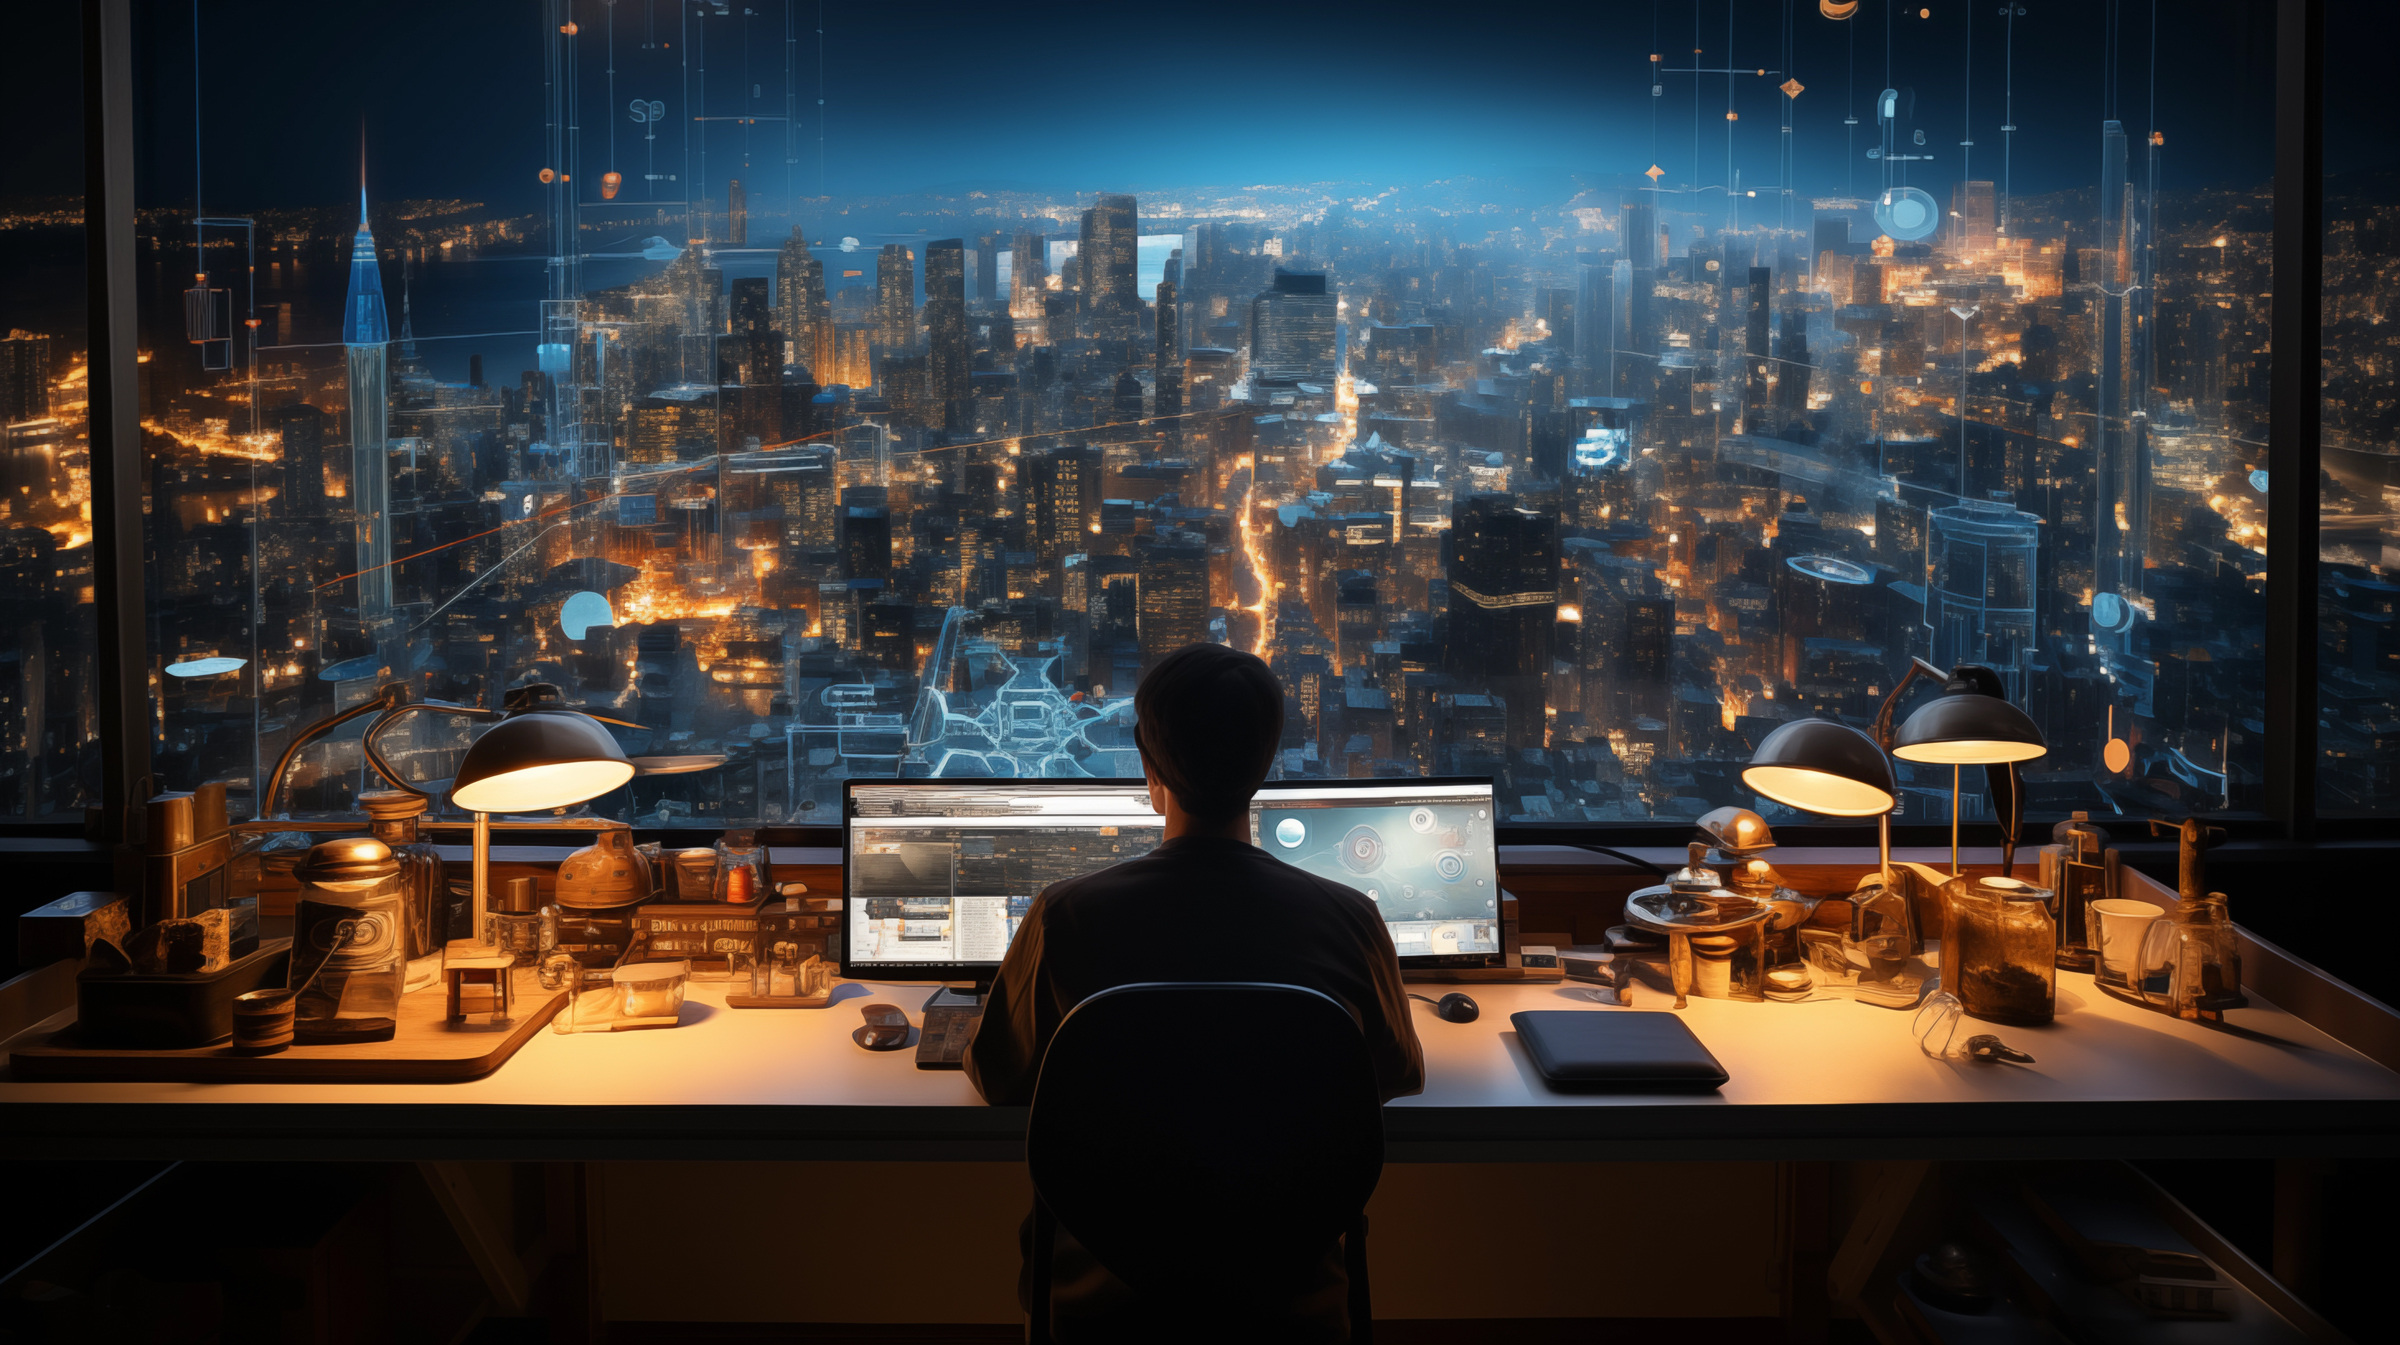 An architect sits at a desk in an office overlooking a futuristic cityscape at night, with a computer screen displaying complex AI algorithms analyzing urban data sets.